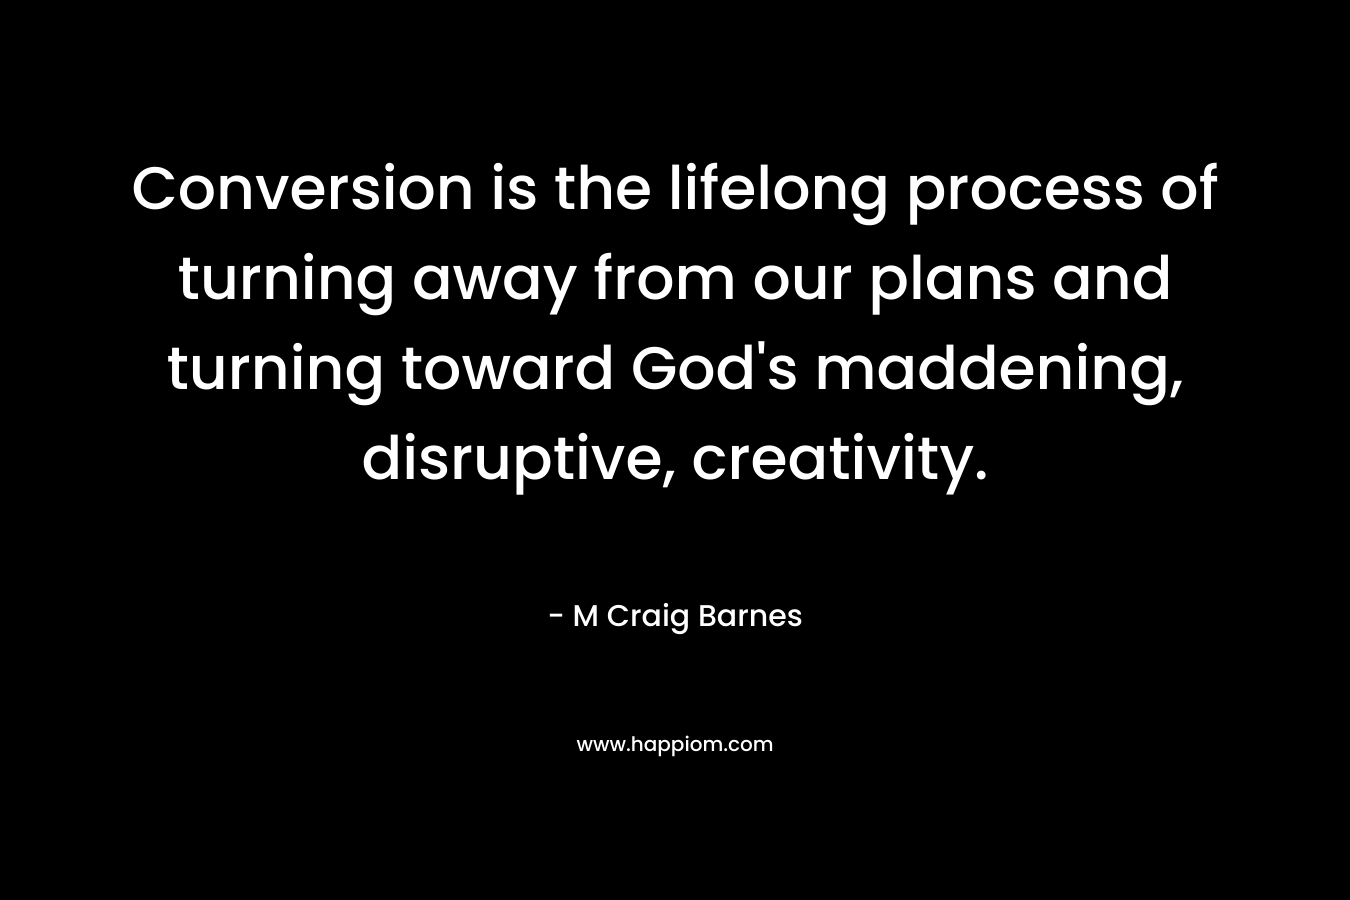 Conversion is the lifelong process of turning away from our plans and turning toward God’s maddening, disruptive, creativity. – M Craig Barnes